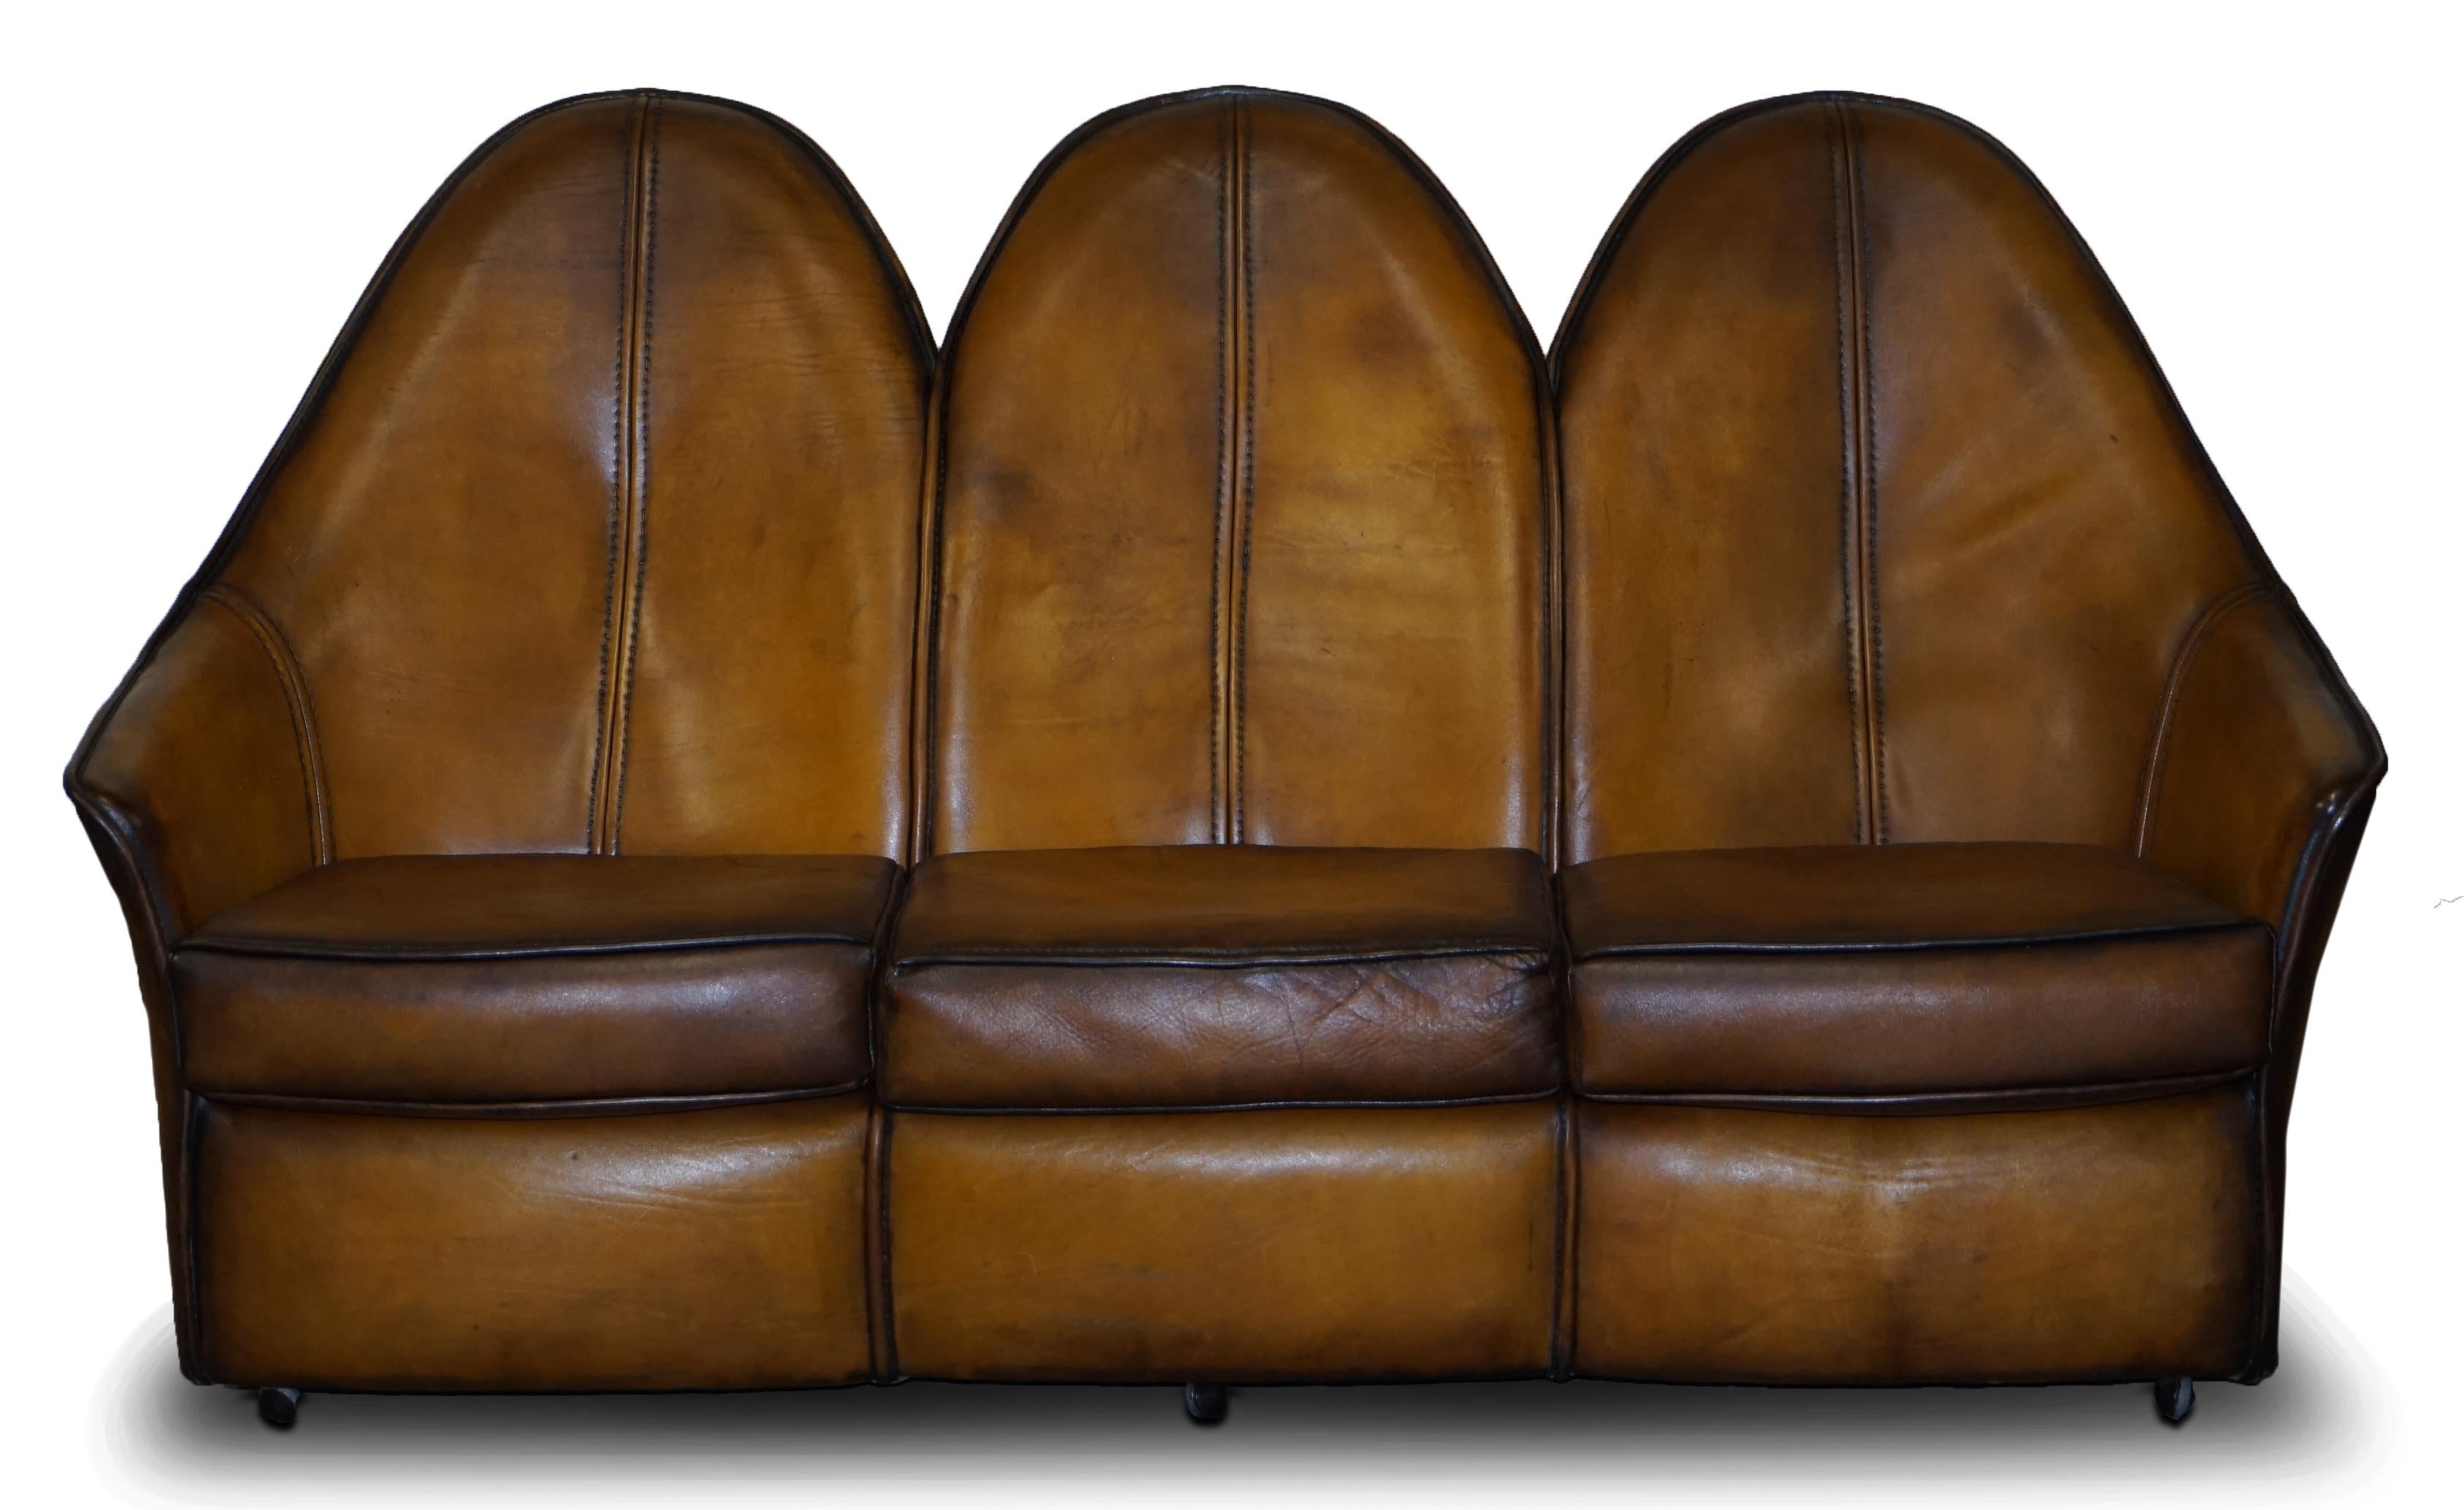 We are delighted to offer for sale this stunning fully restored Vintage hand dyed Cigar brown leather Art Modern three seater sofa which is part of a large suite

As mentioned this is part of a suite, in total I have a pair of armchairs, a two